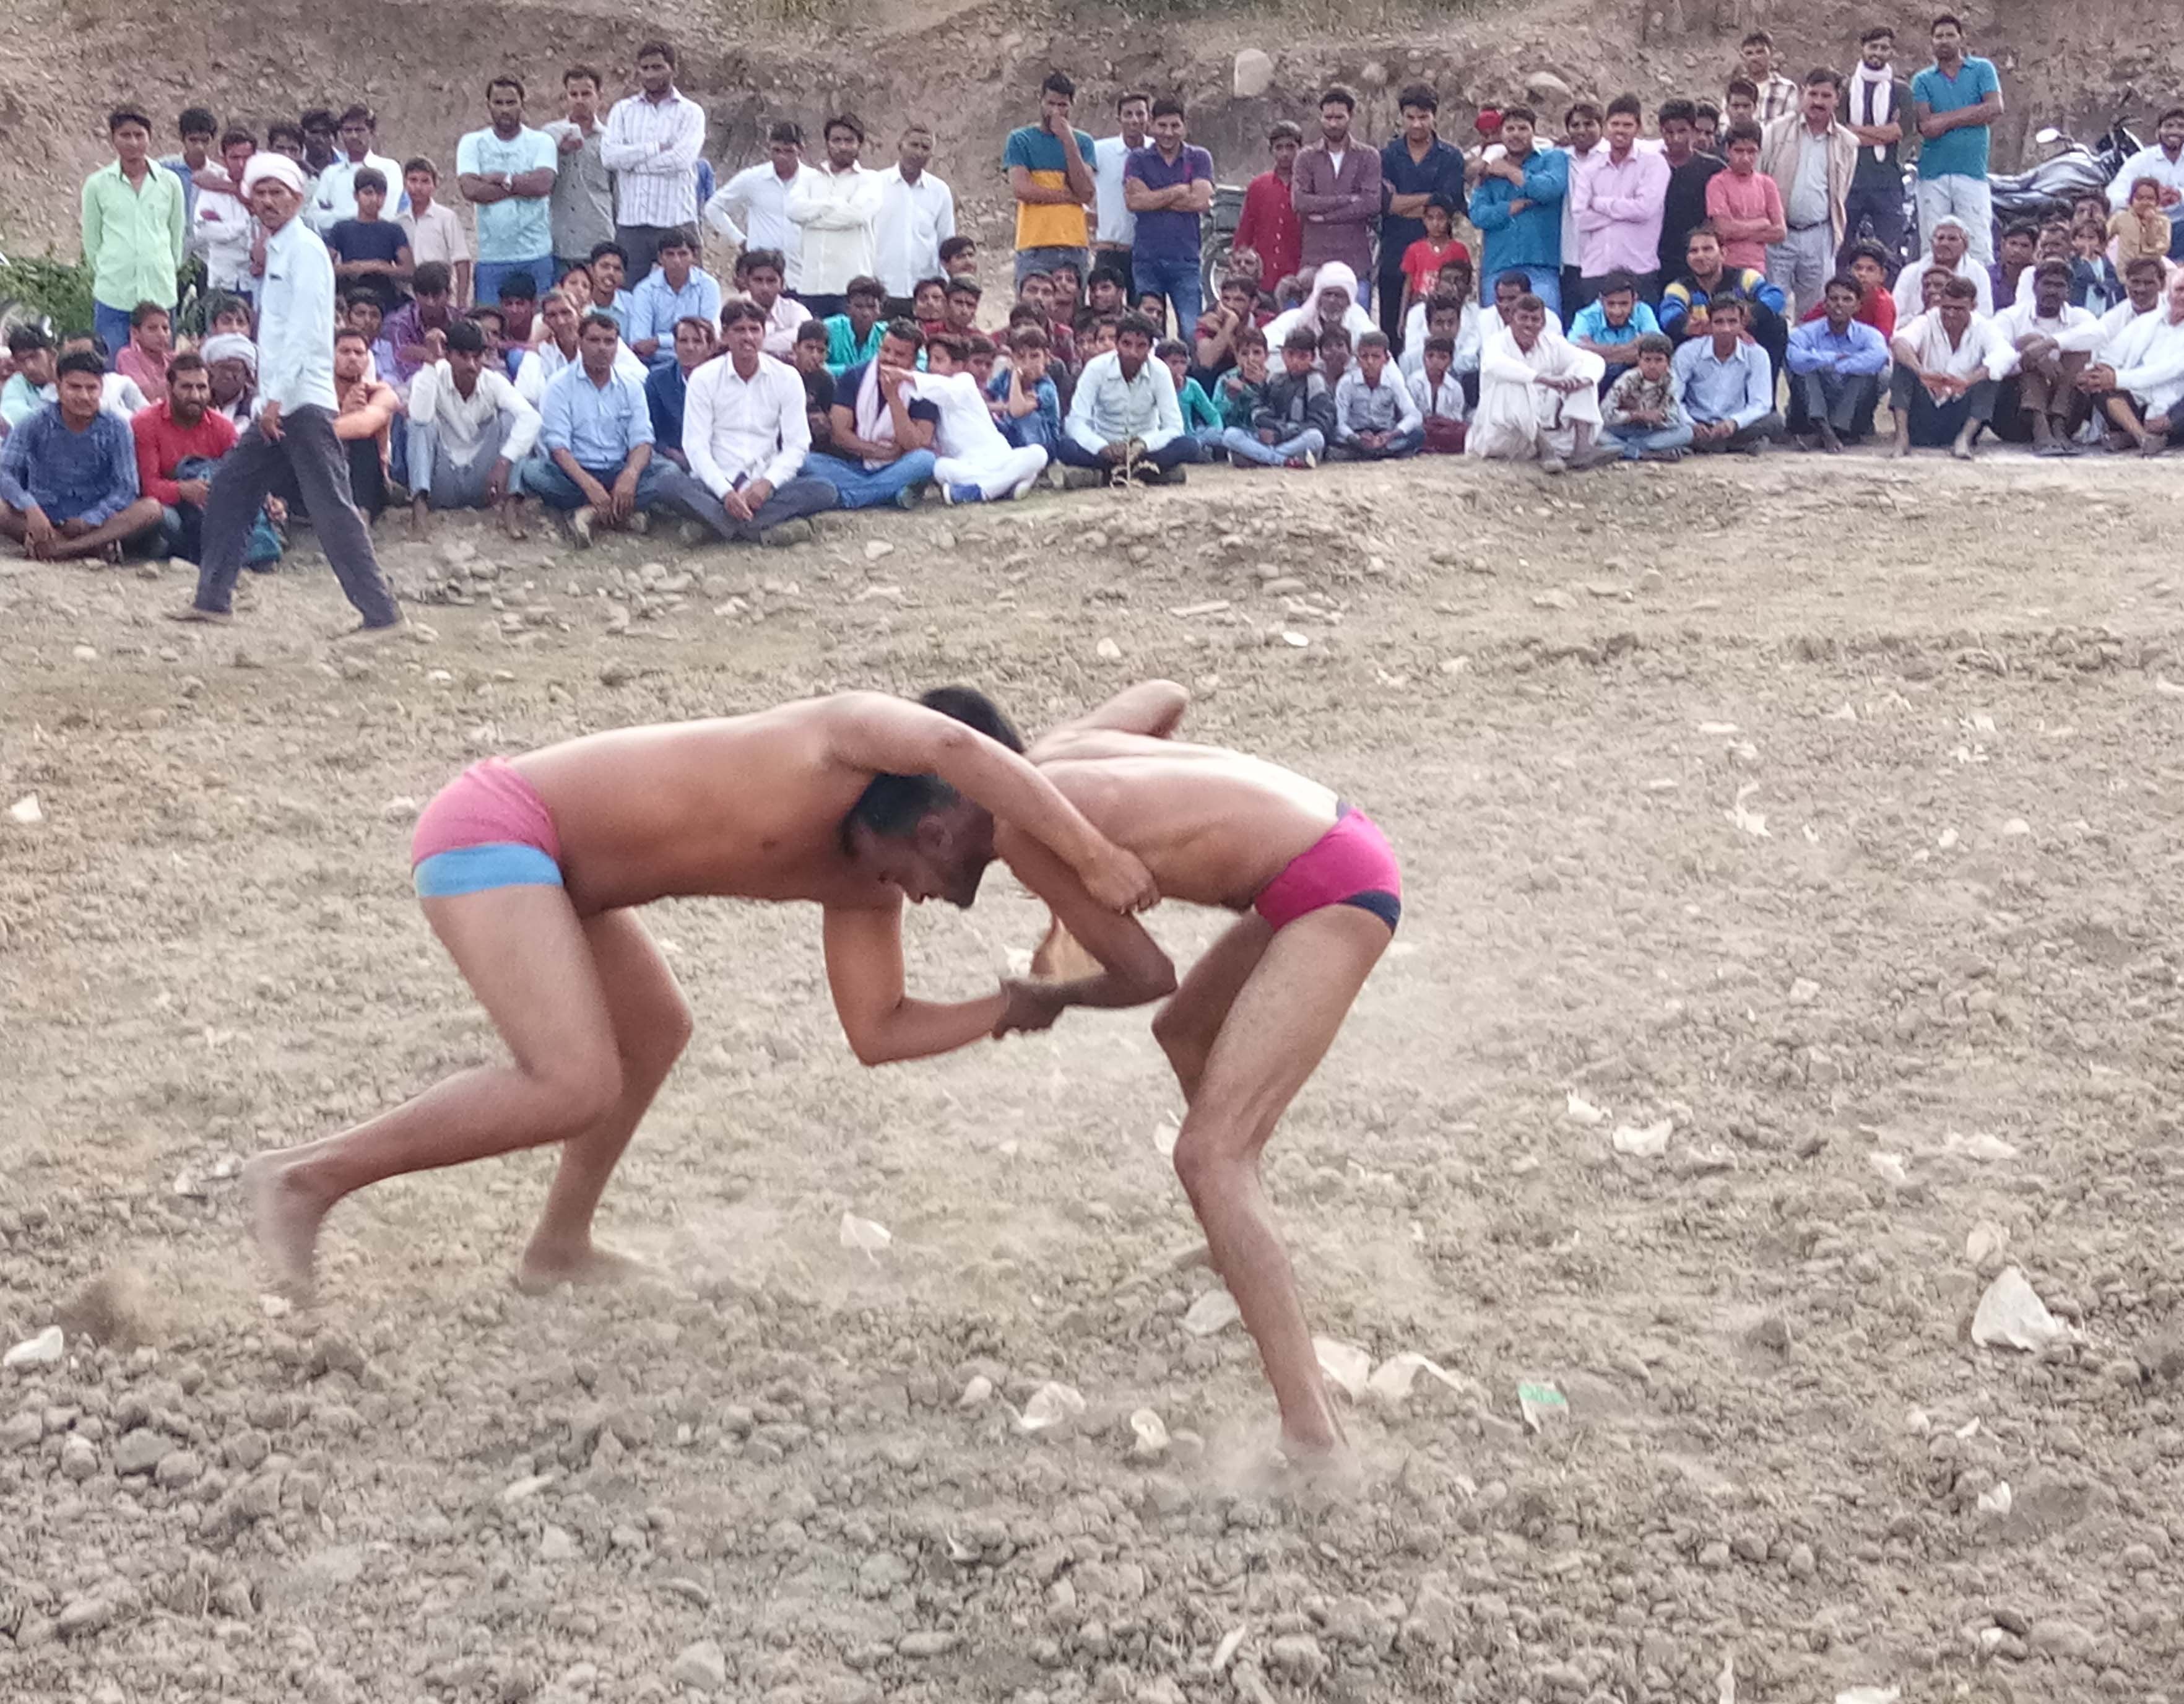 Wrestlers in the arena show the stamina